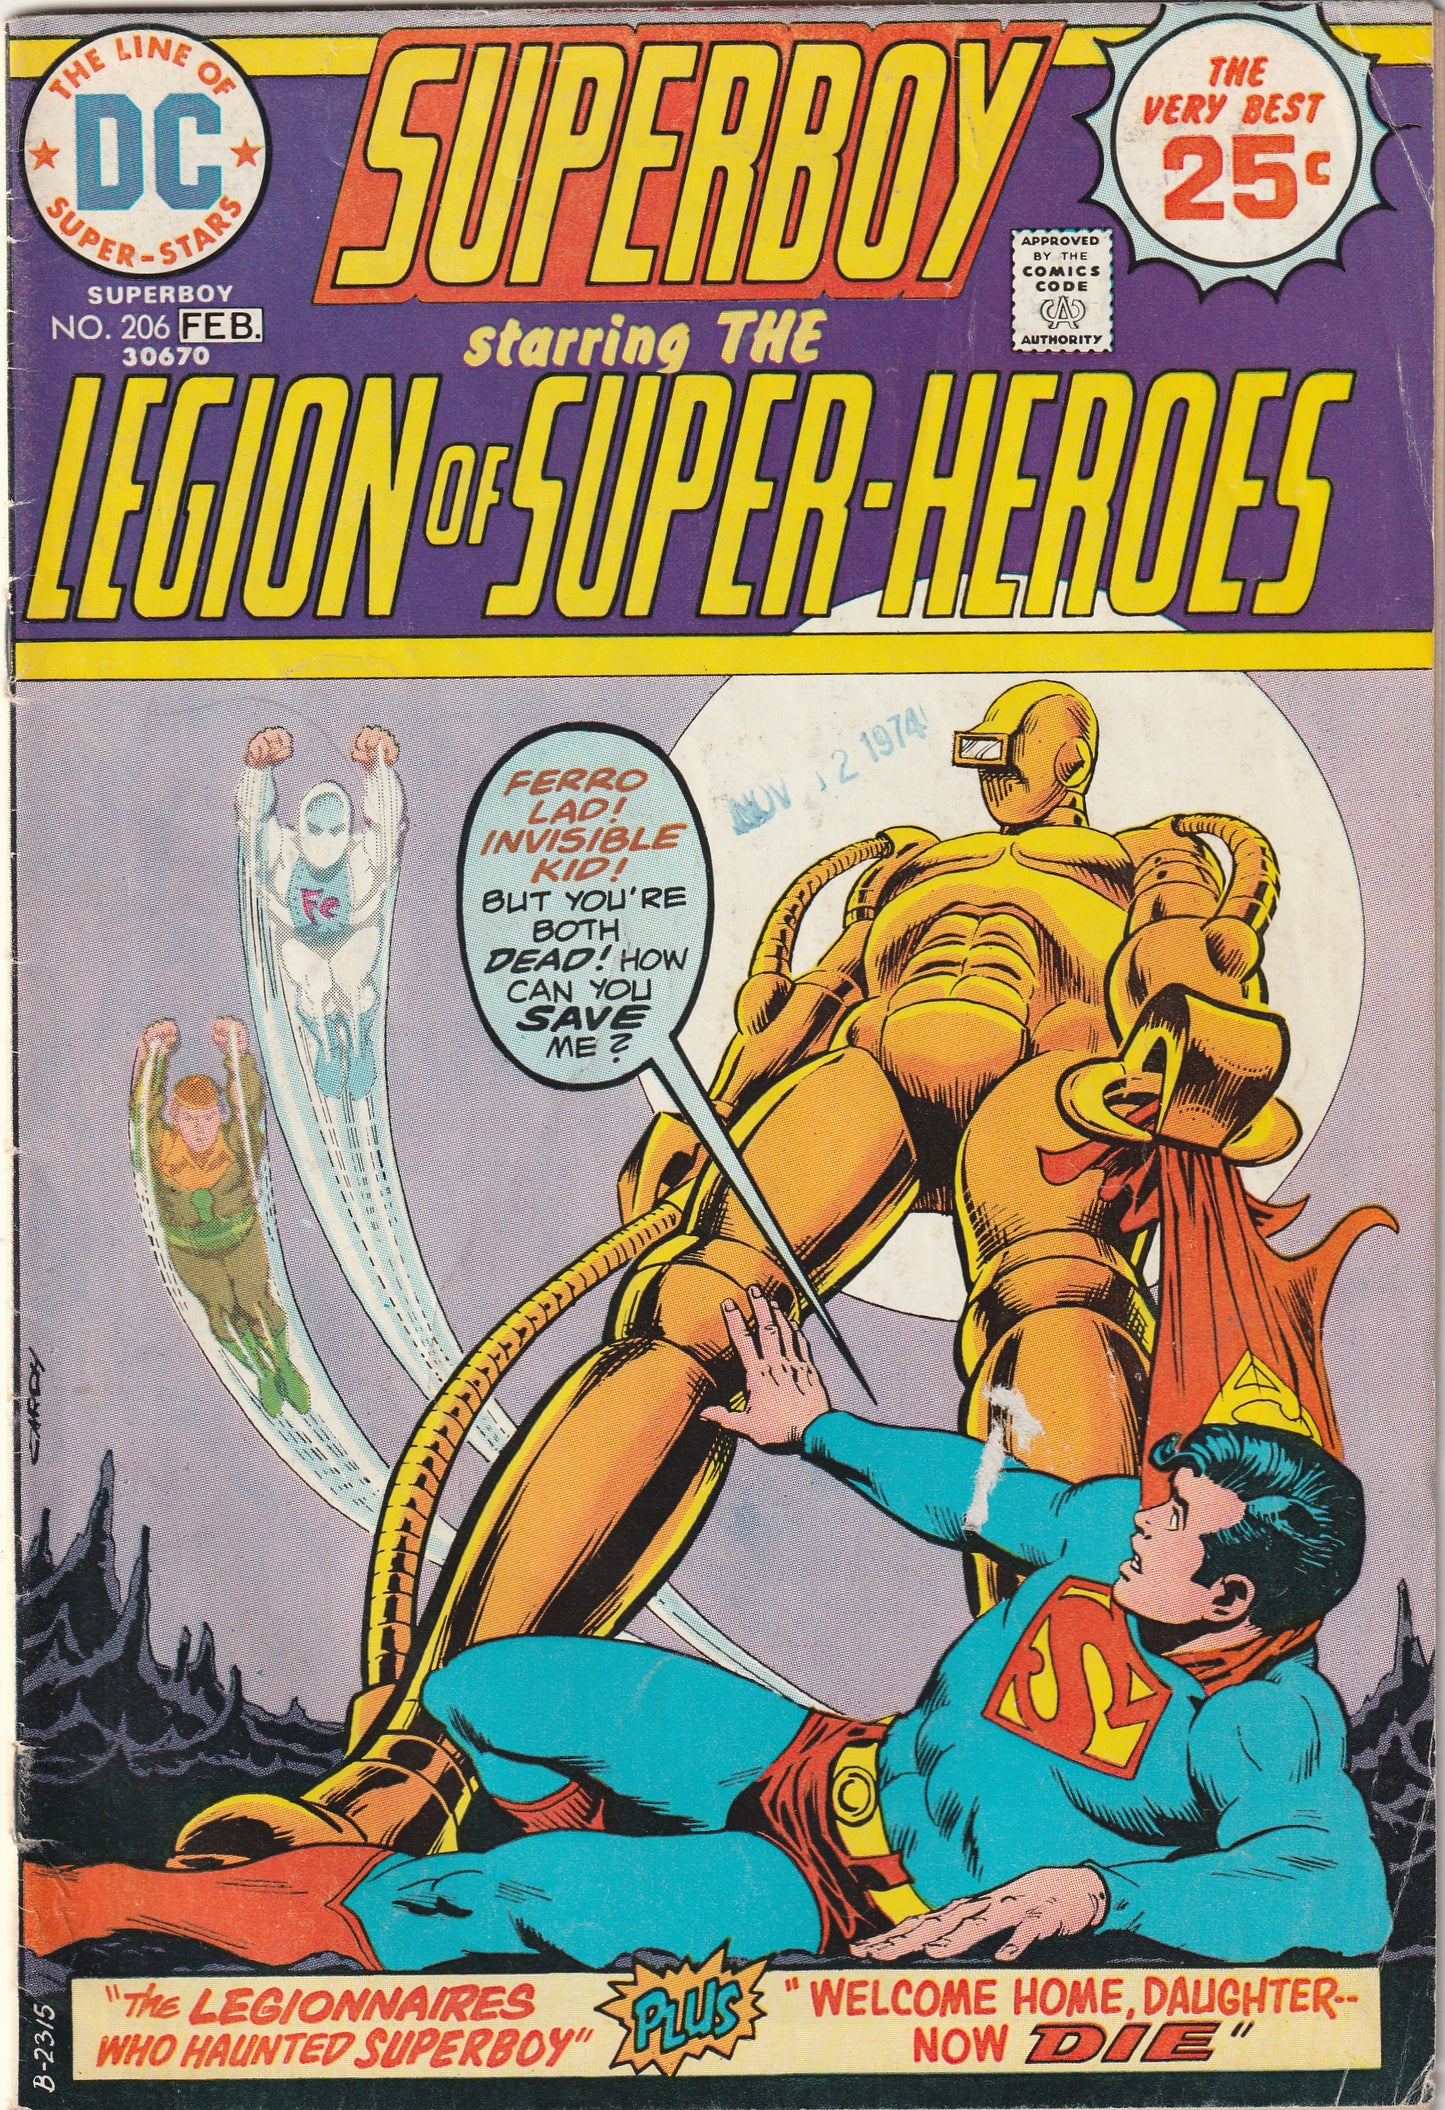 Superboy #206 (1975) - Starring the Legion of Super-Heroes - Ferro Lad & Invisible Kid appearance